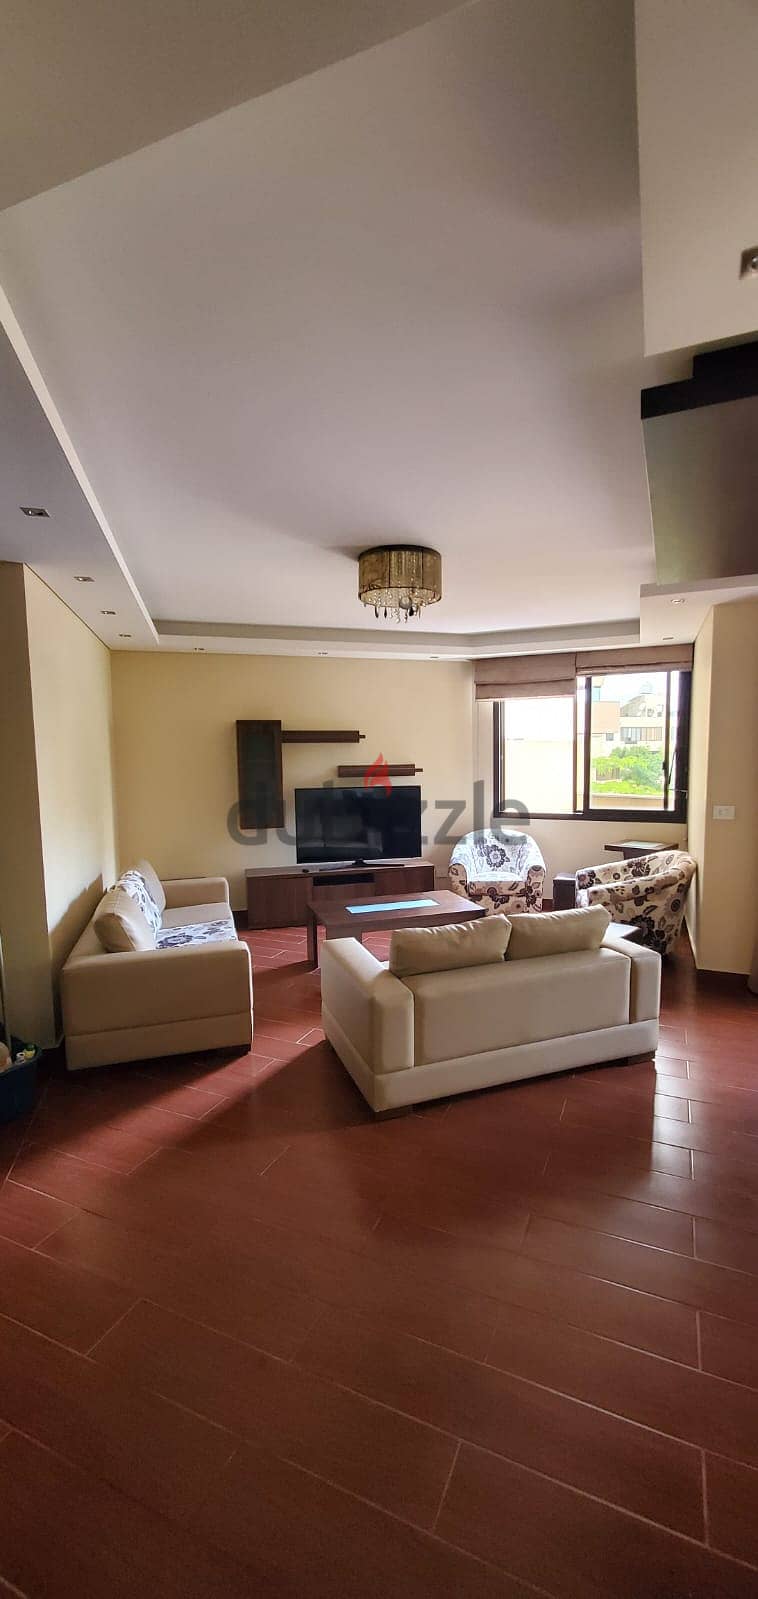 HOT DEAL, Furnished 150m2 apartment + 100m2 terrace for sale in Zalka 14